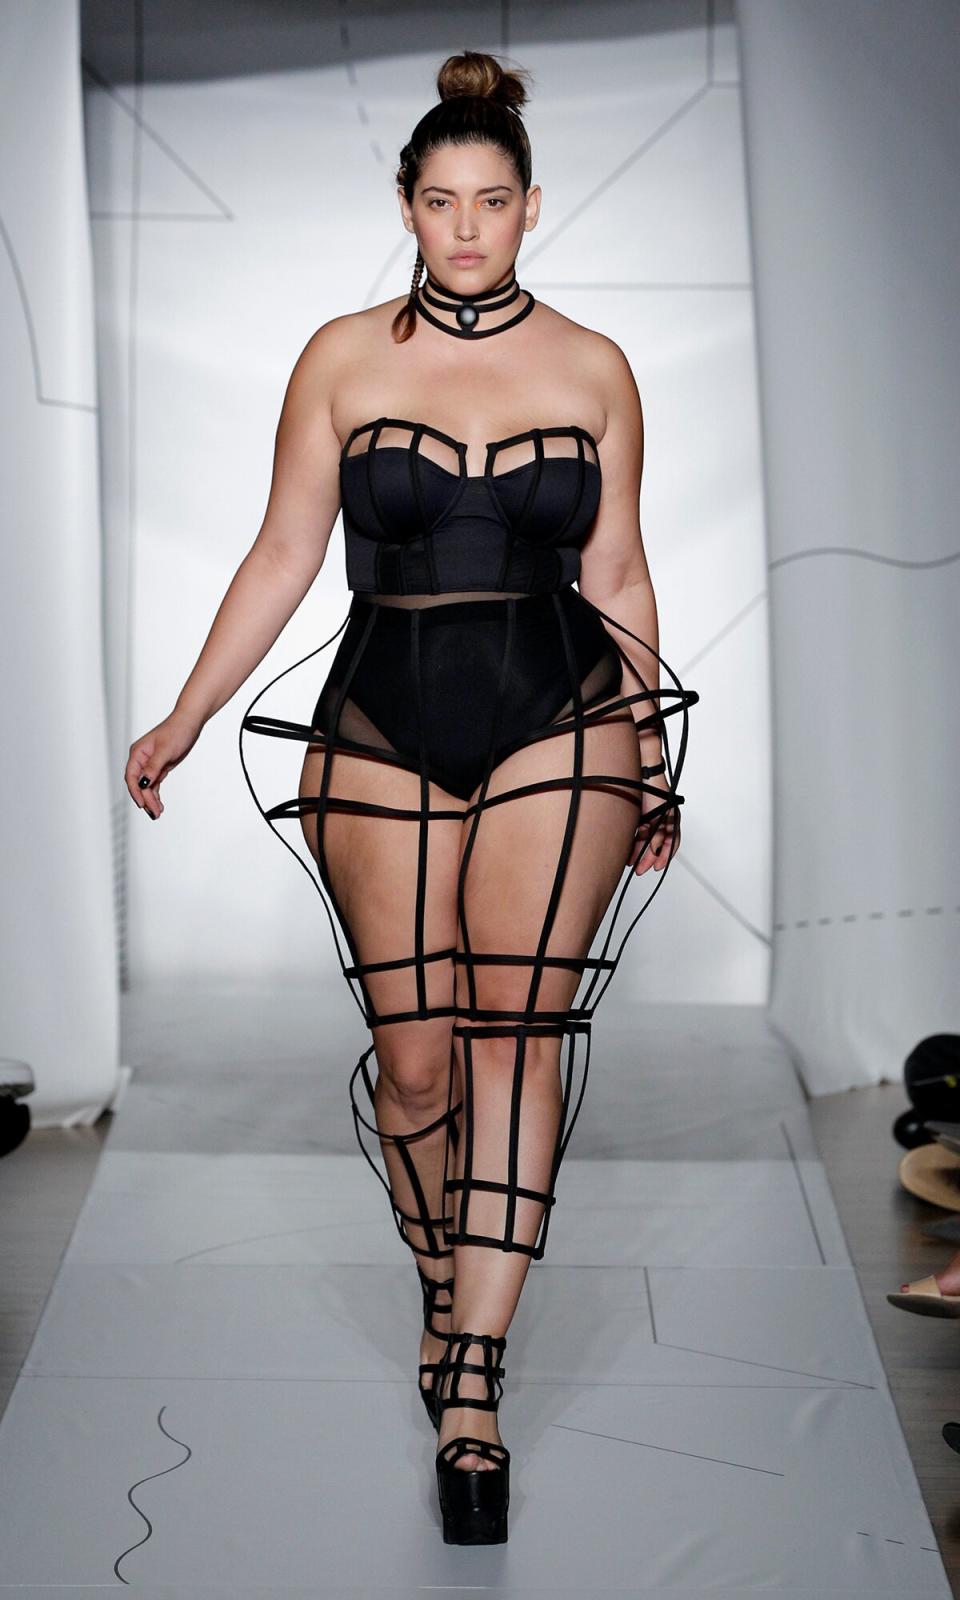 Denise Bidot walks the runway at the Chromat SS15 Formula 15 fashion show at The Standard Hotel on September 4, 2014 in New York City